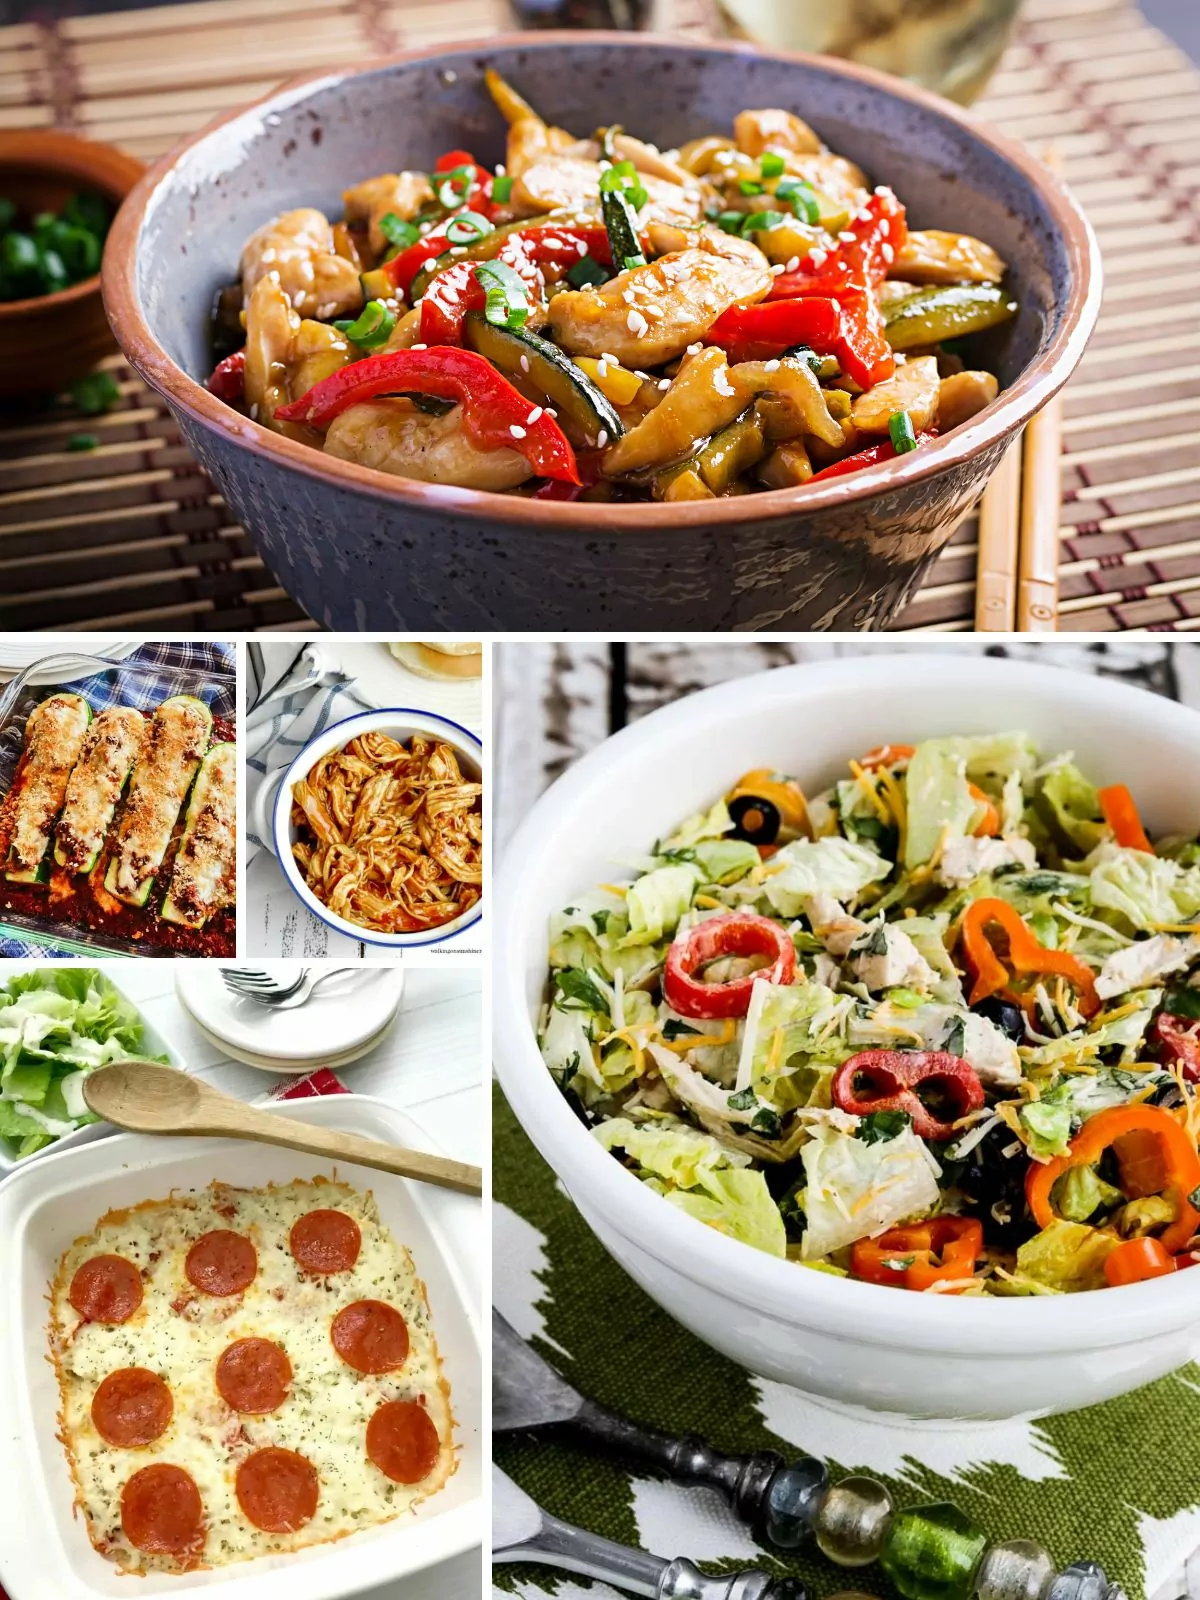 5 low carb recipes for dinner.